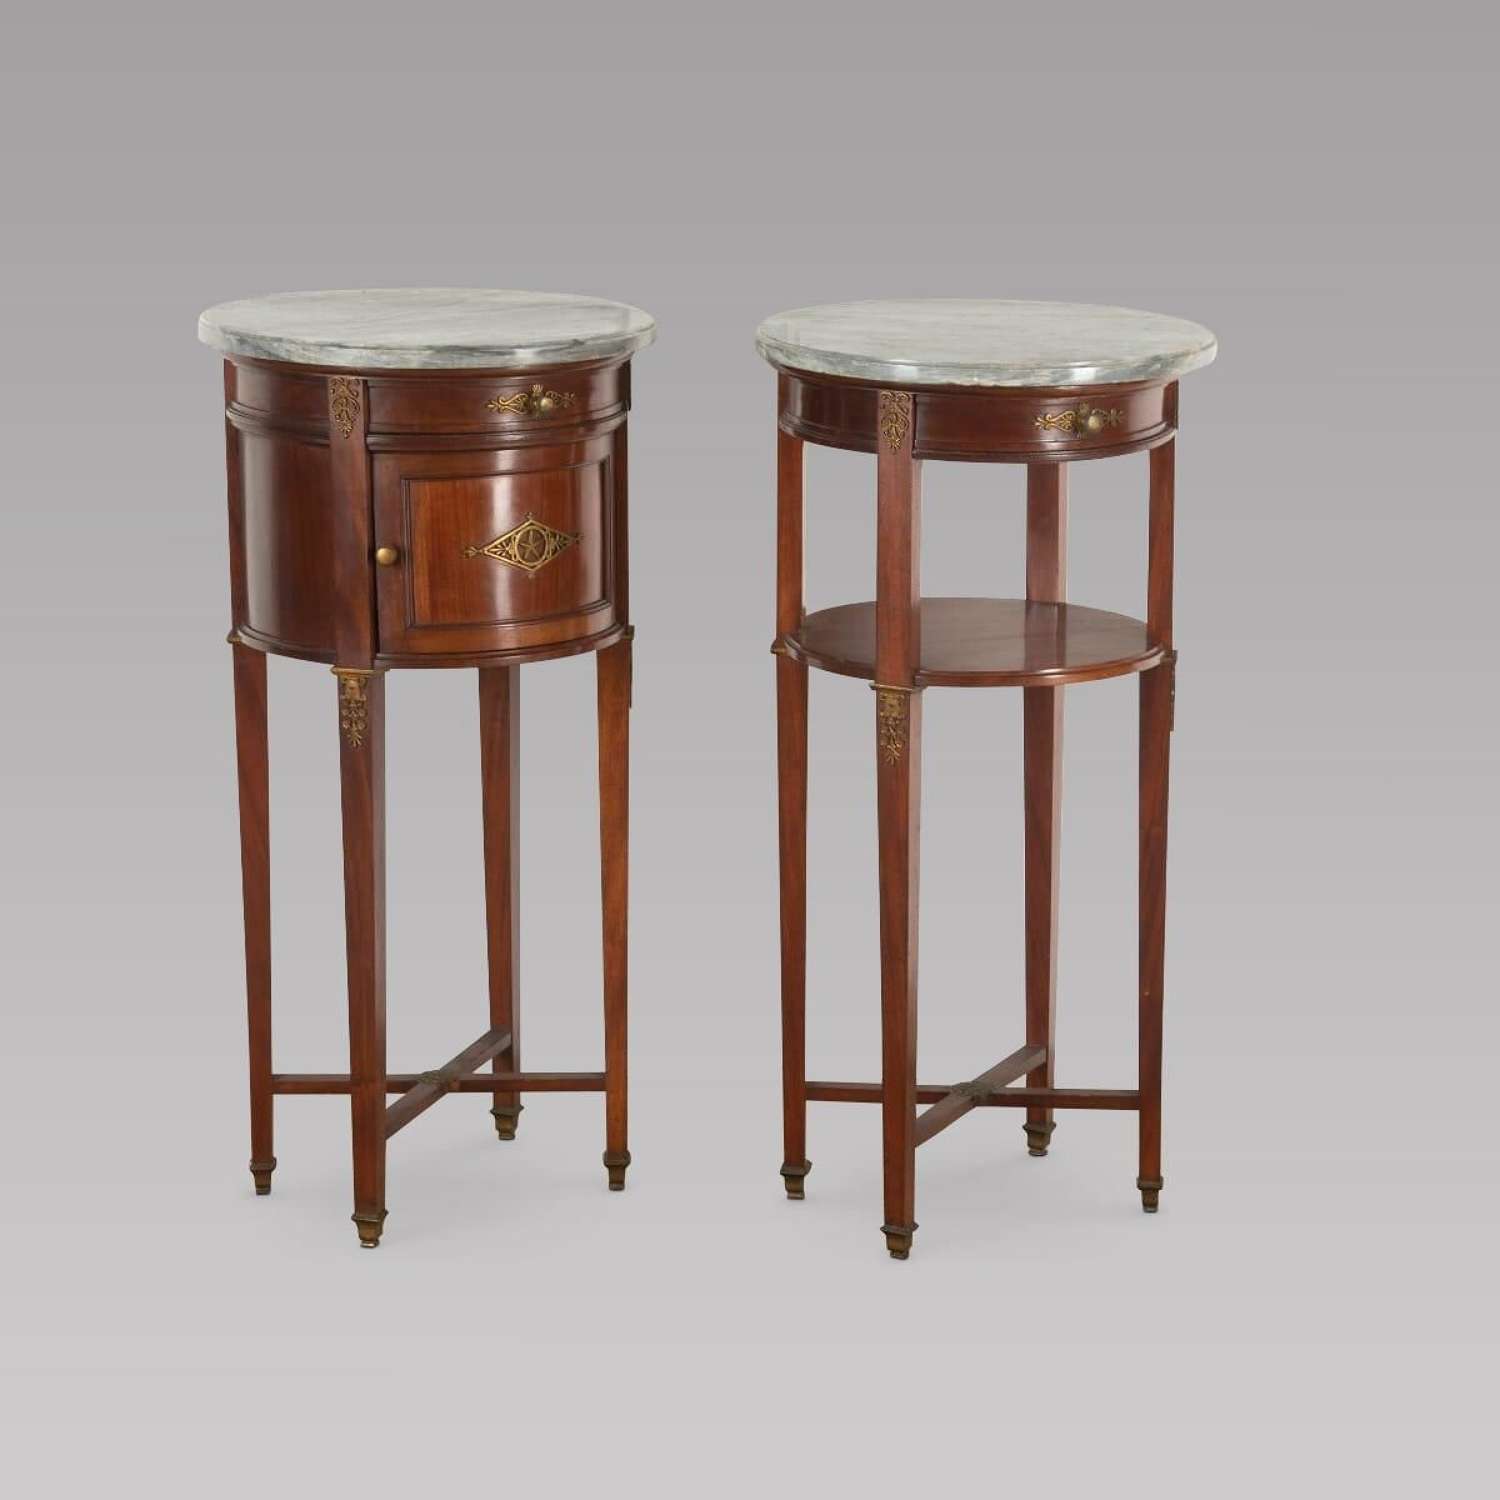 Pair of Late 19th Century French Bedside Tables